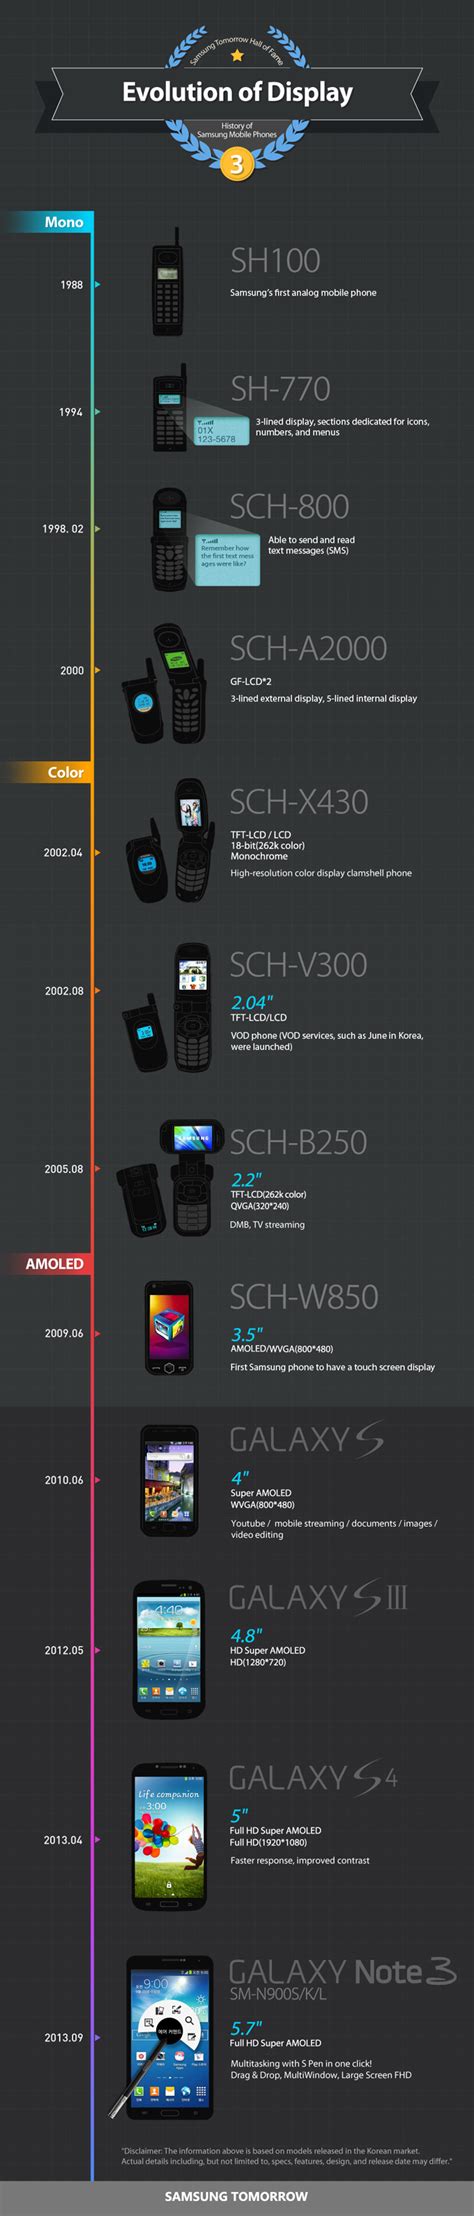 Samsung Shows The Timeline Of Mobile Phone Screens In Latest